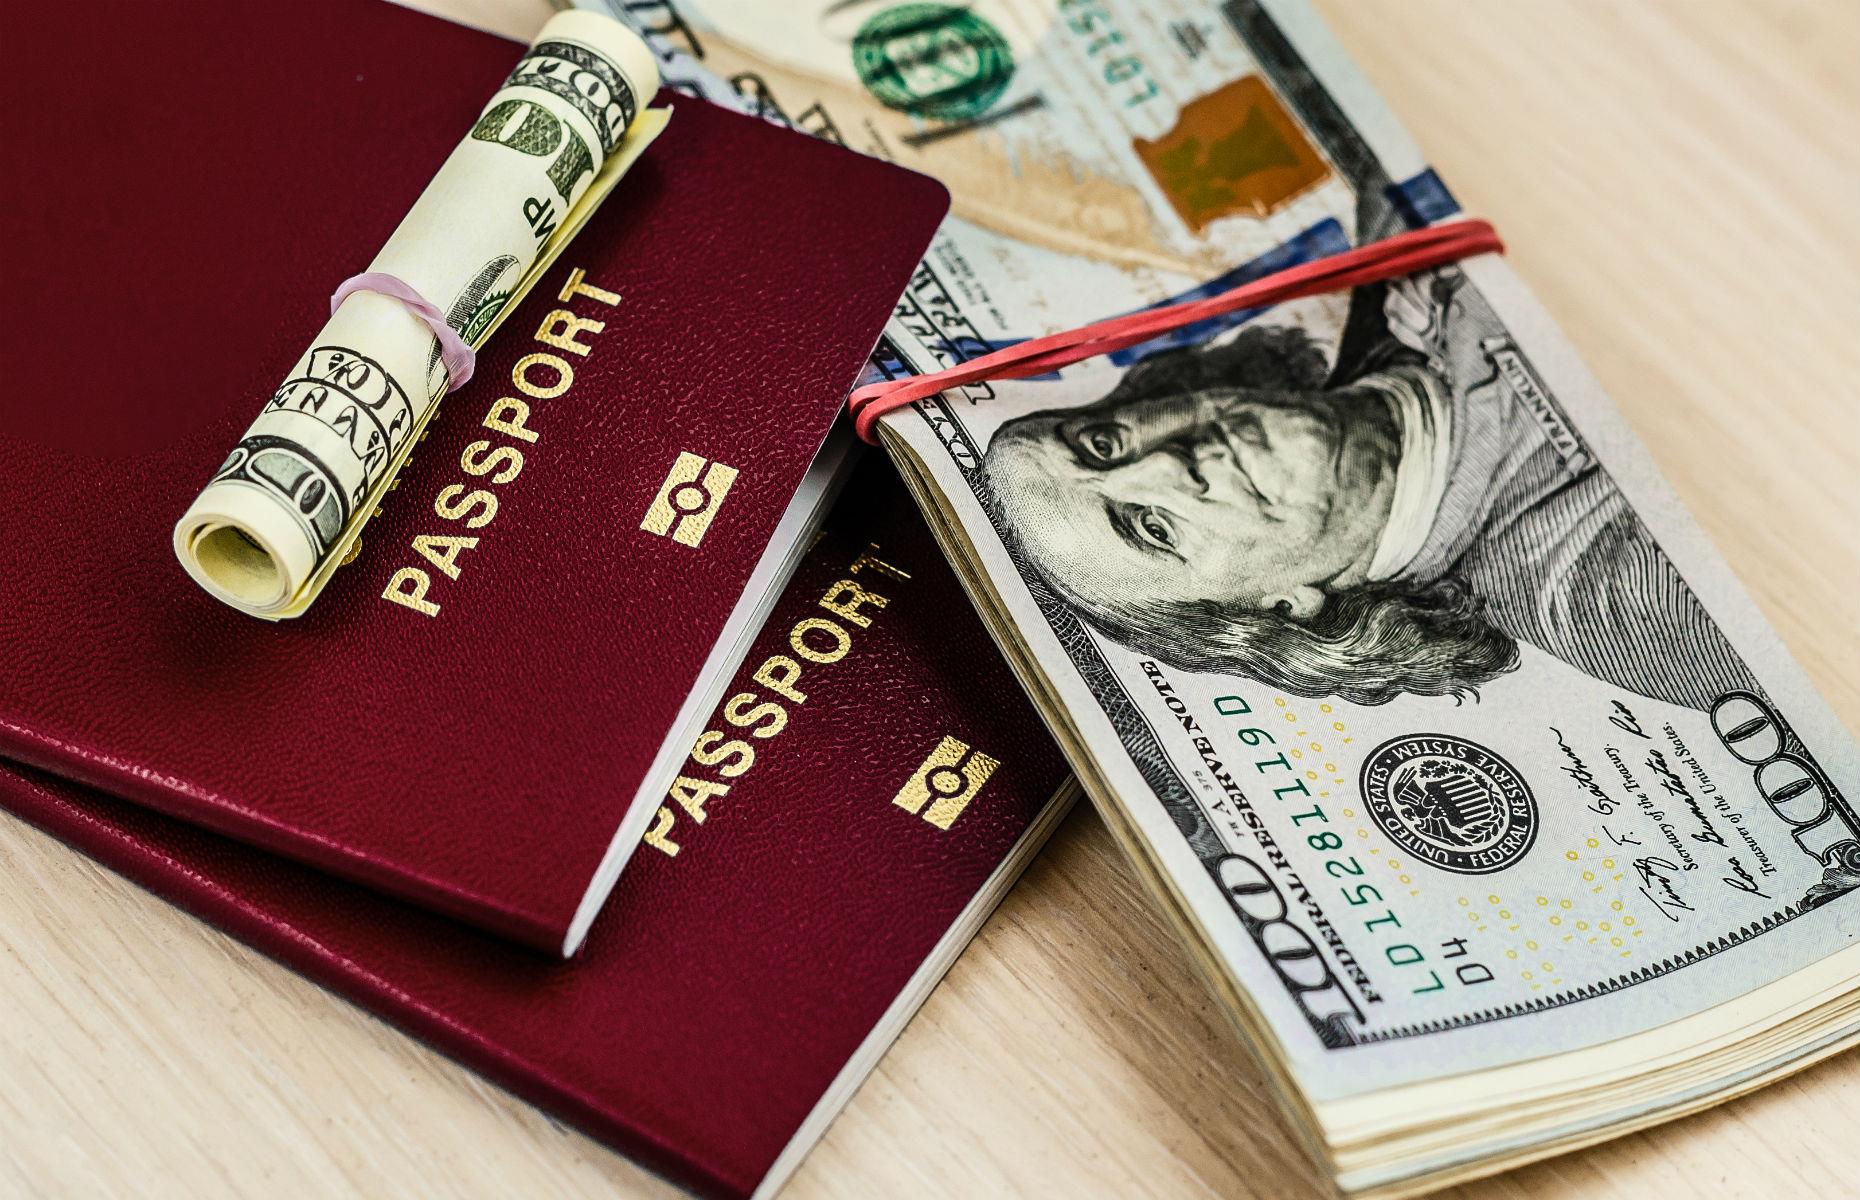 The nations selling passports at a premium